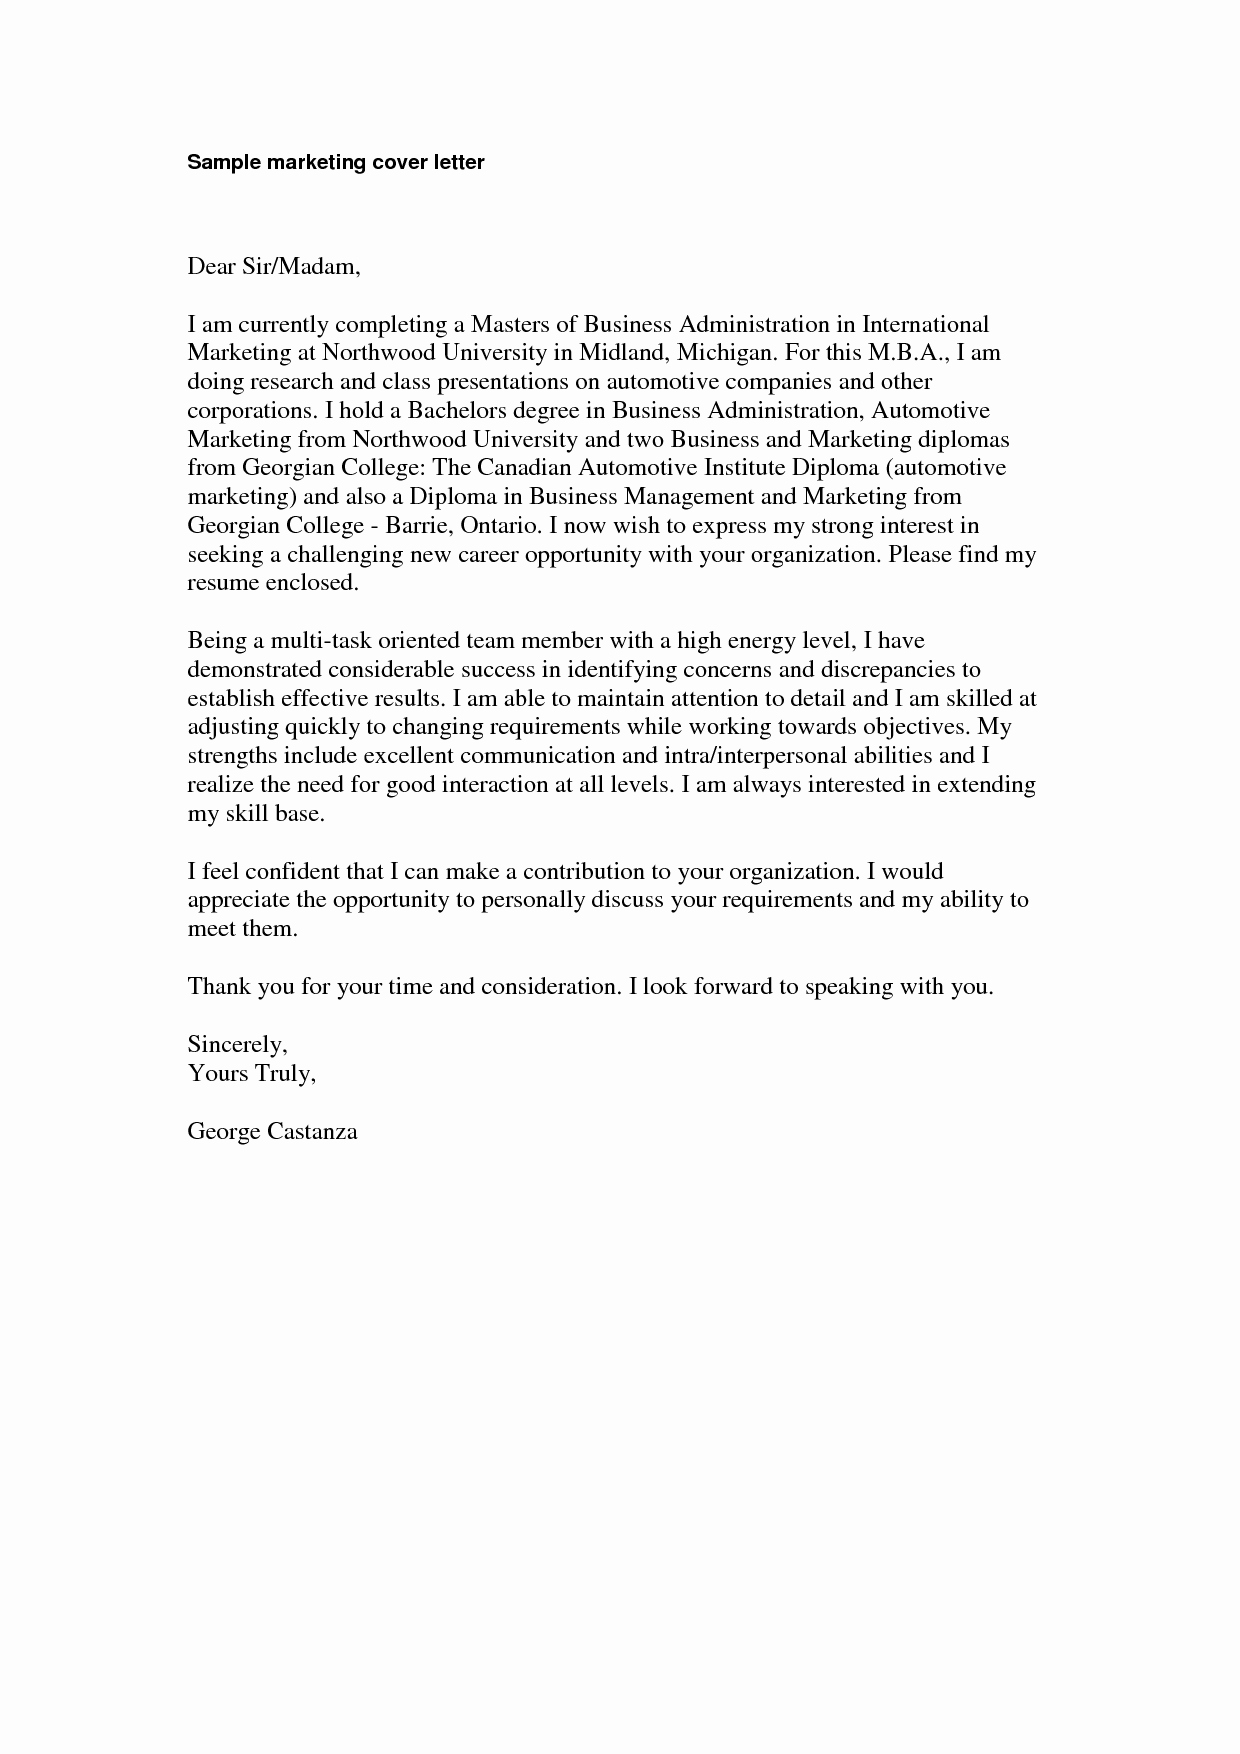 Sample Cover Letters Marketing Best Of Marketing Cover Letter Sample Marketing Cover Letter